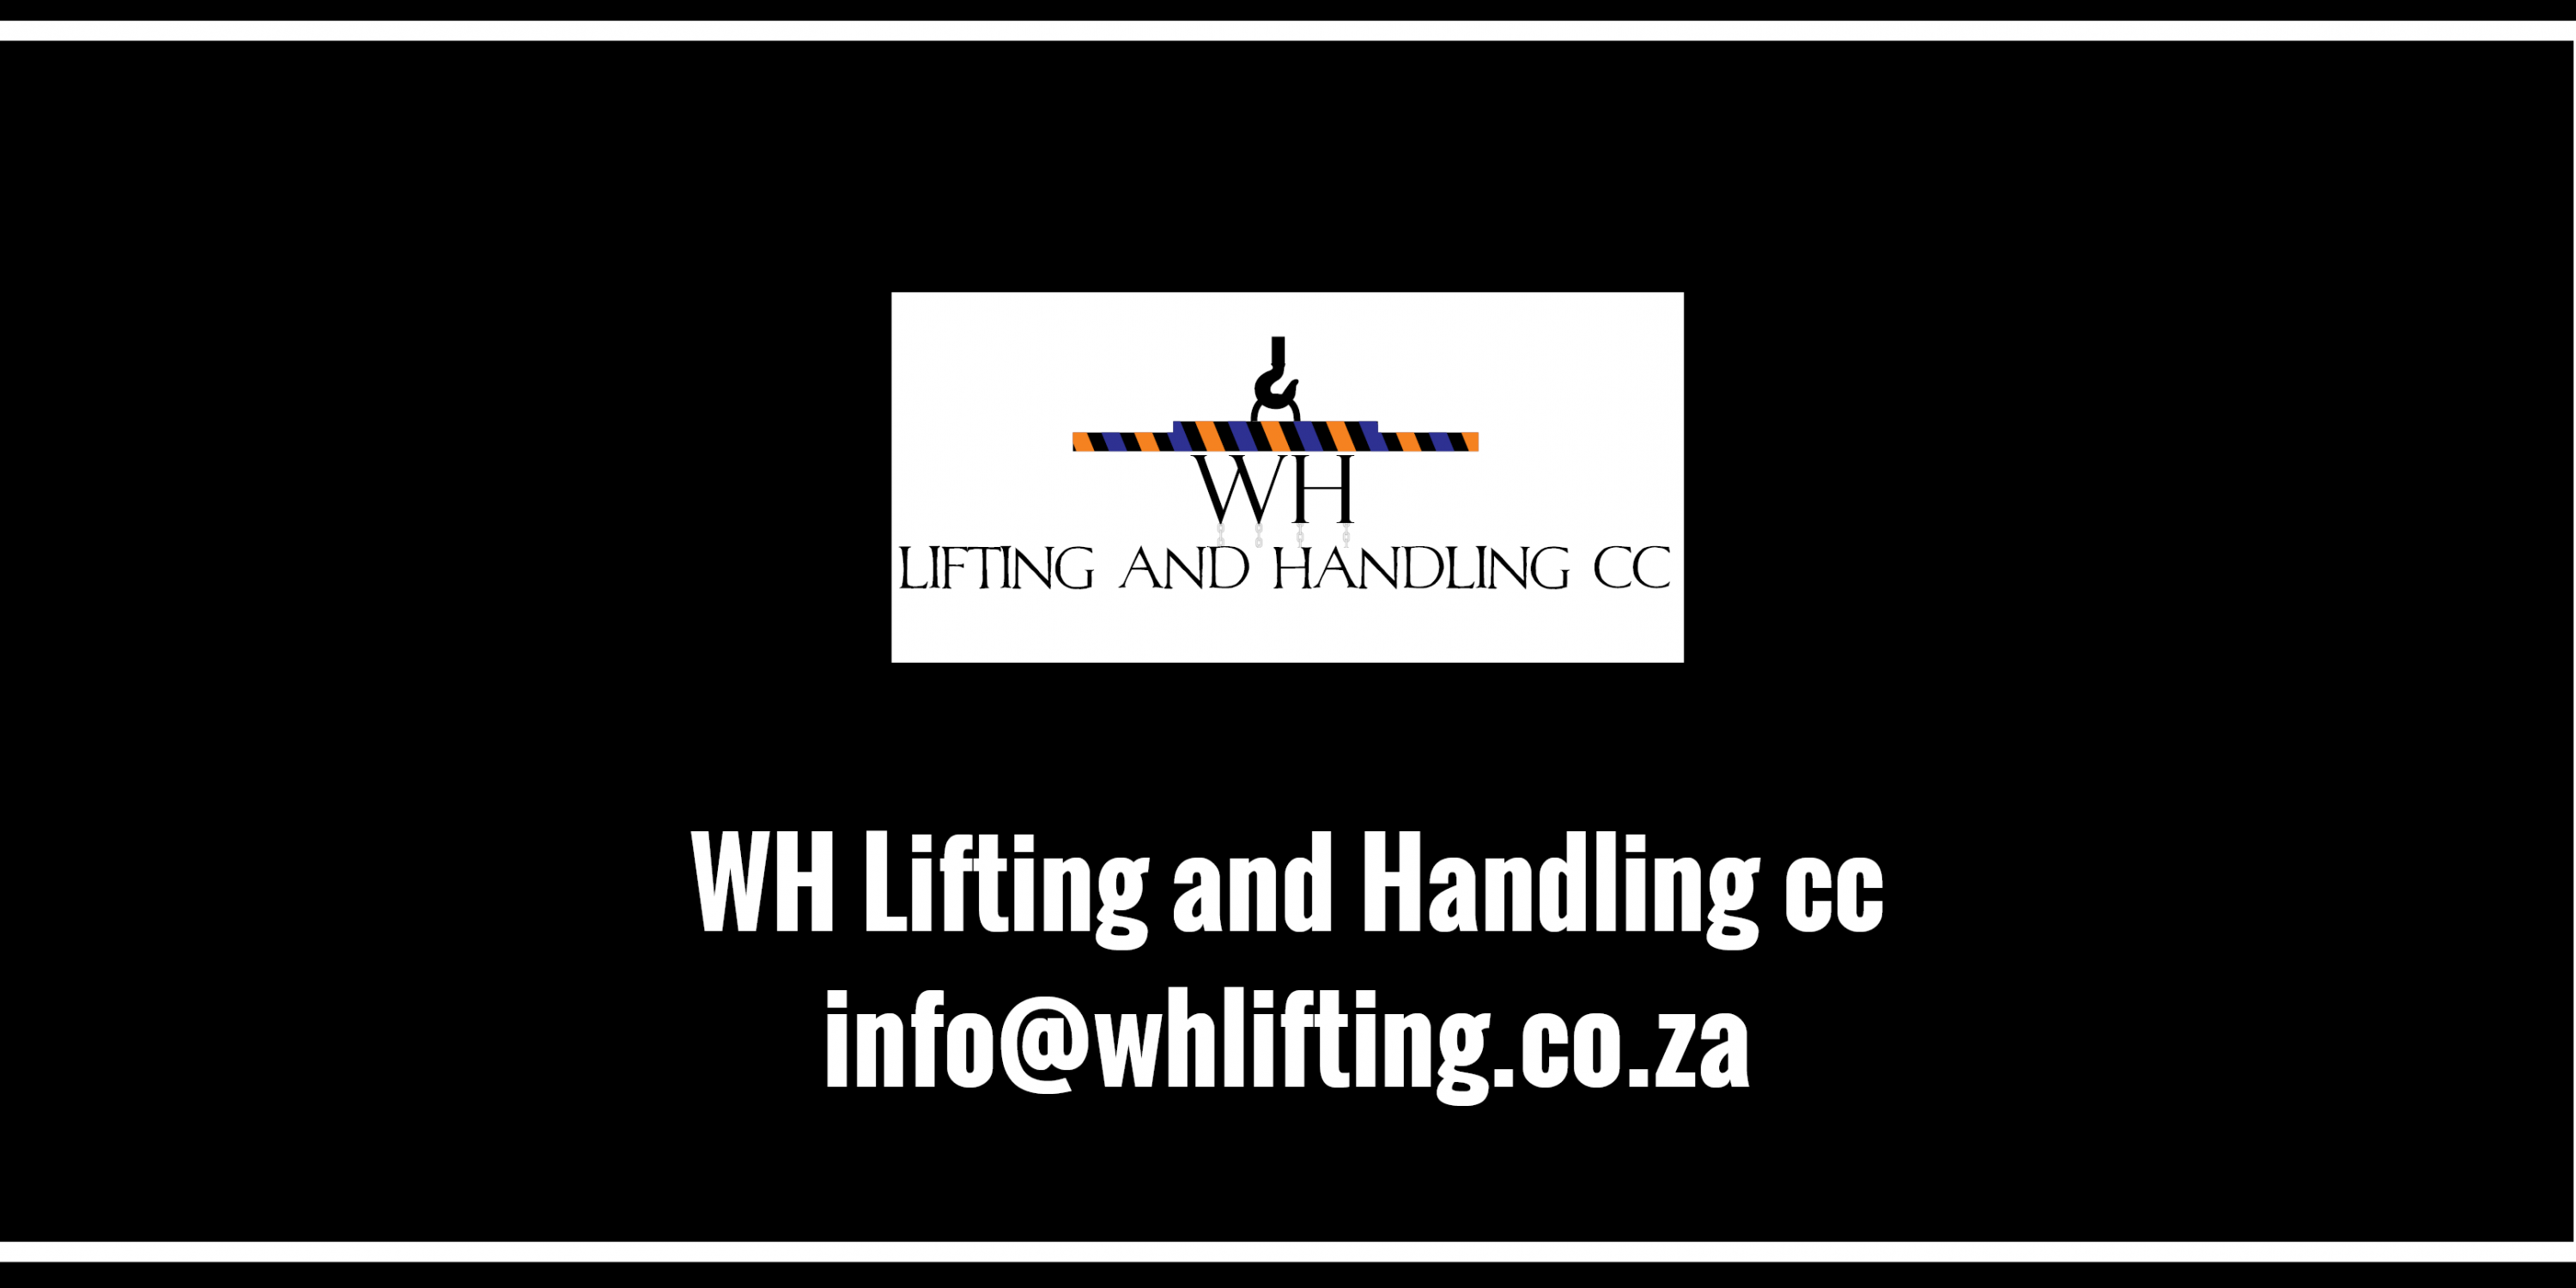 WH Lifting and Handling cc